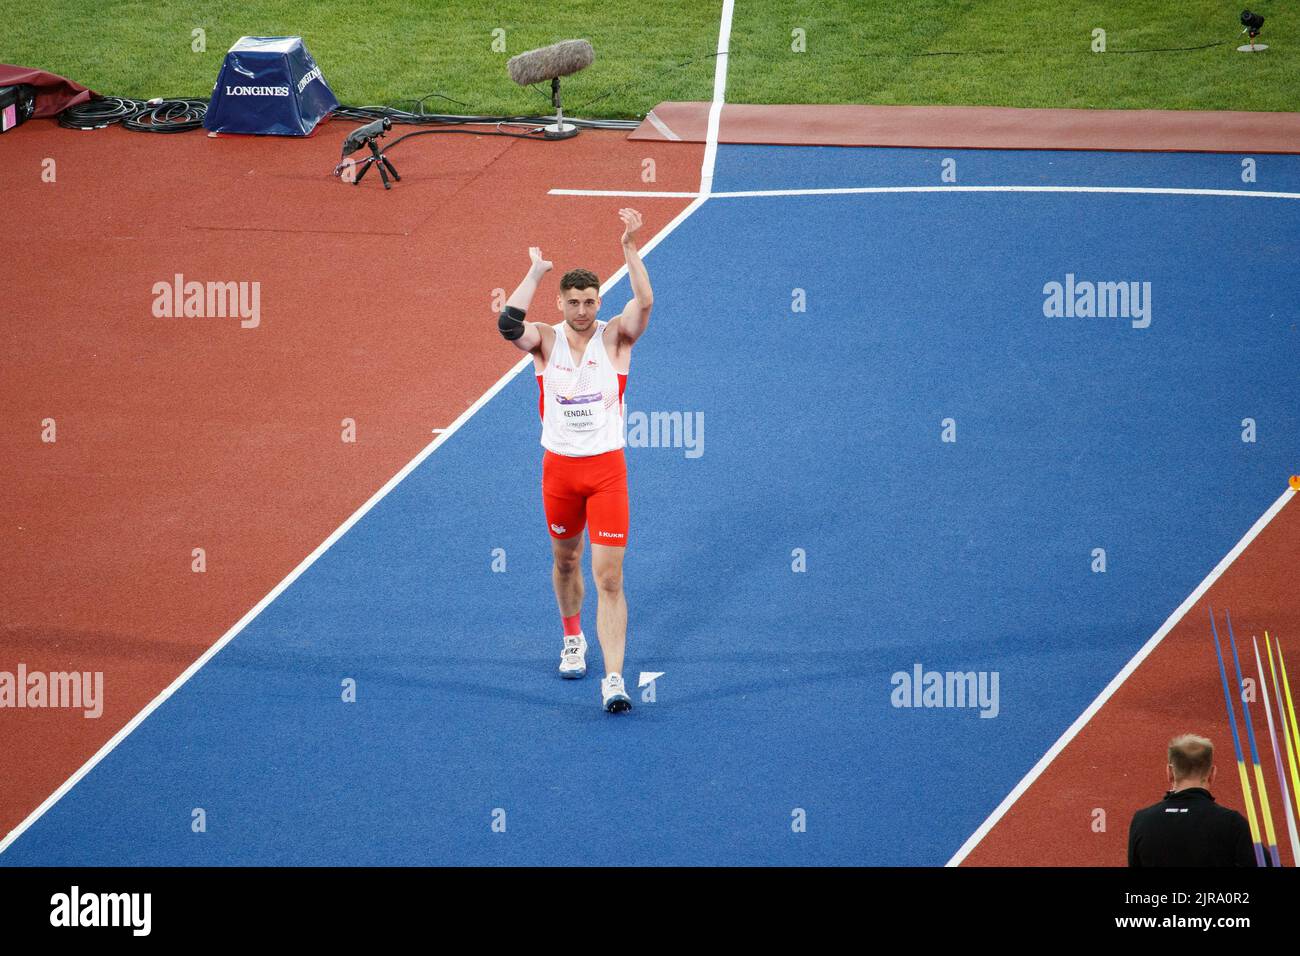 Action from the Birmingham Commonwealth Games at Alexander sports stadium on the evening of 5th August 2022. Picture shows Harry Kendall of England taking part in the Javelin throw in the mens decathlon. Stock Photo